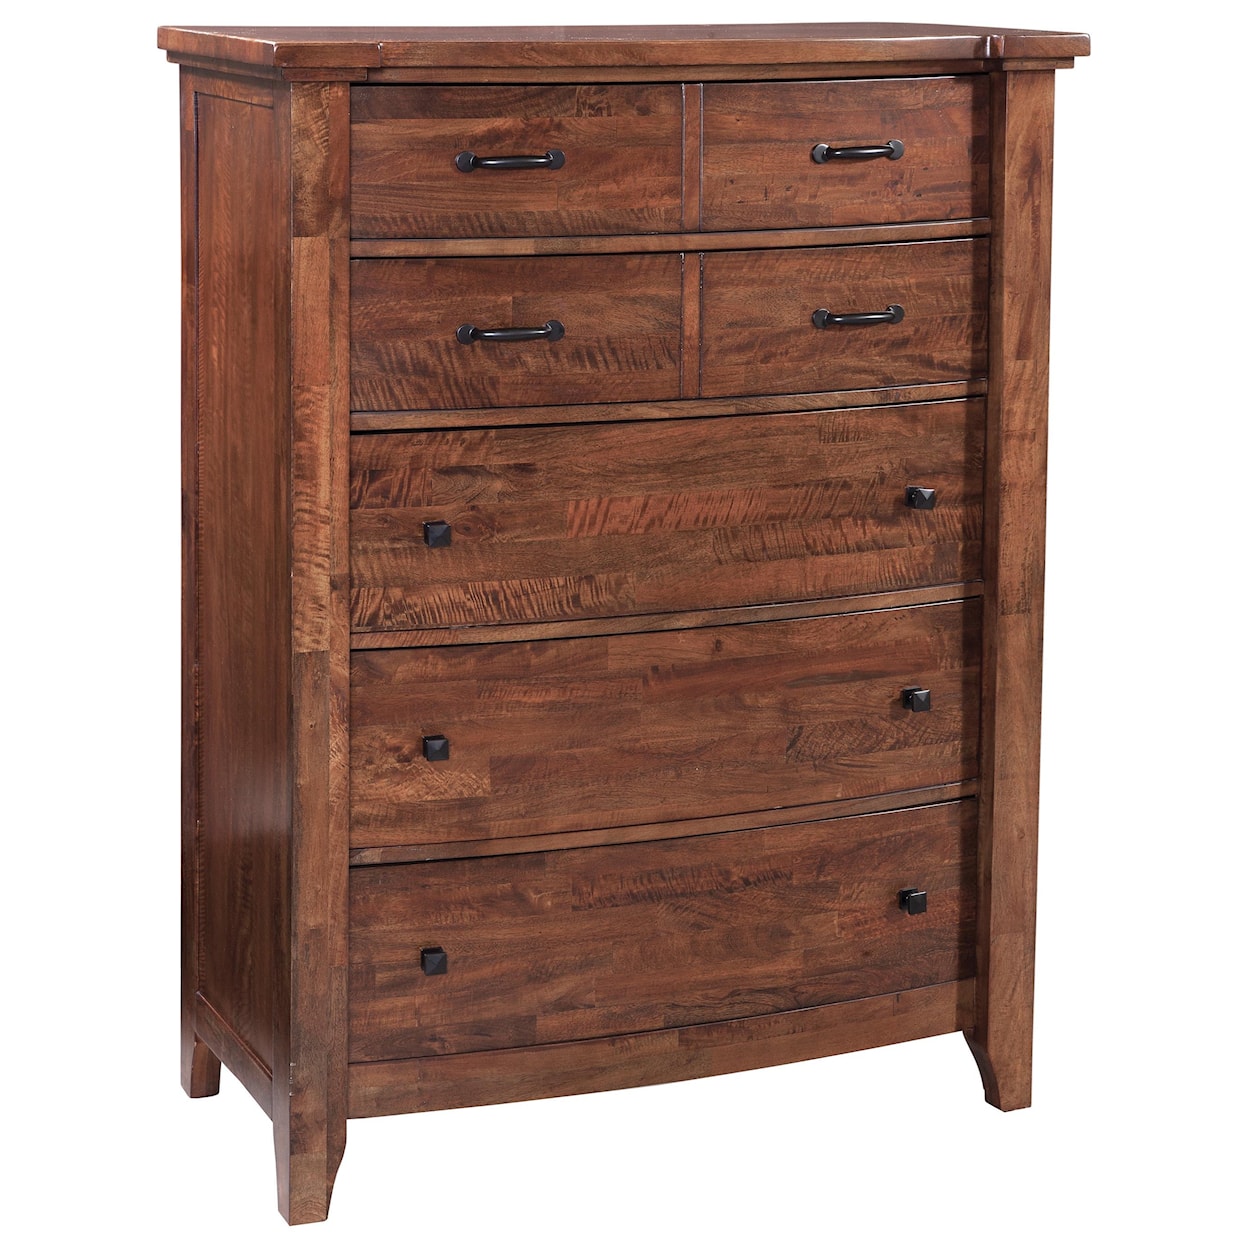 Napa Furniture Design Whistler Retreat Chest of Drawers